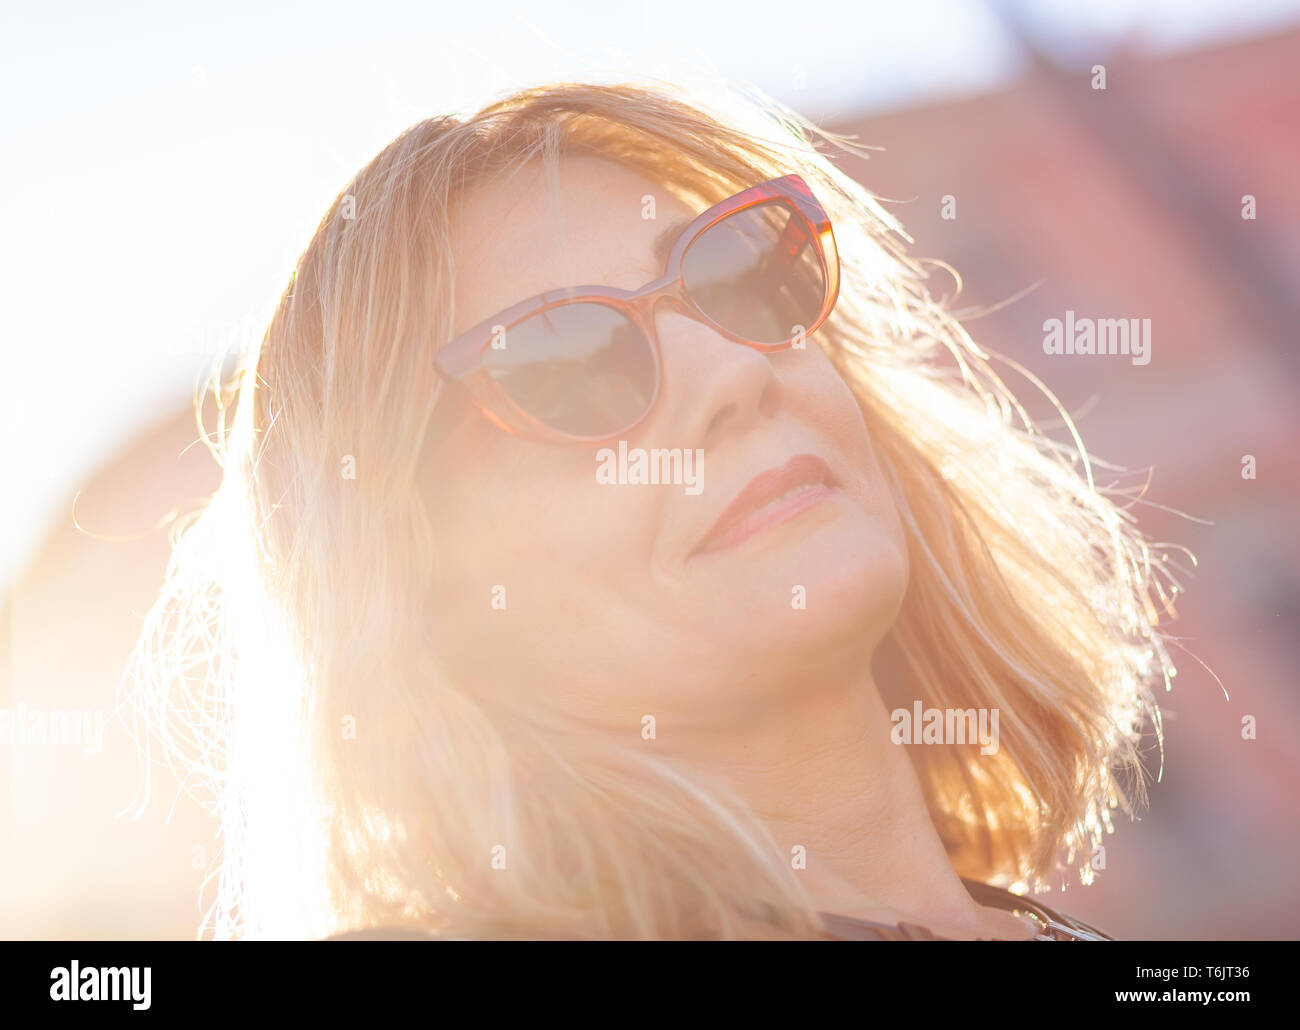 Close up portrait of an attractive woman with red sunglasses and blonde hair. Stock Photo